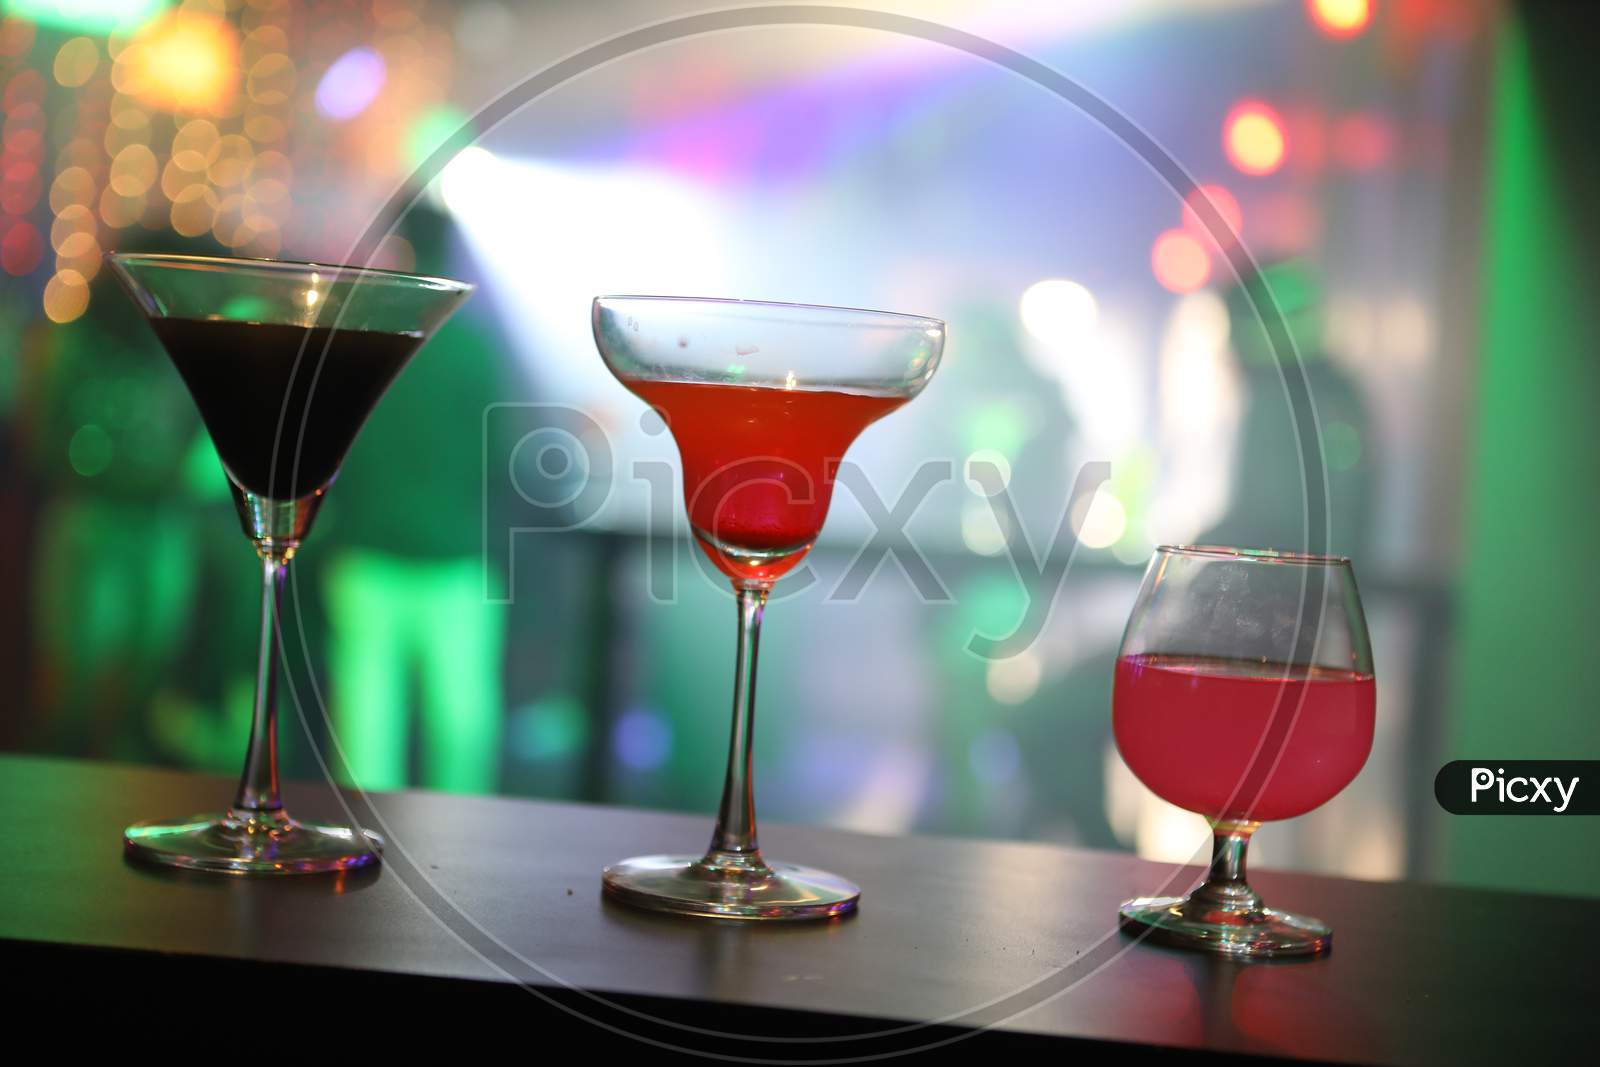 Cocktail Glasses on a Bar Table Counter With Neon Lights Background